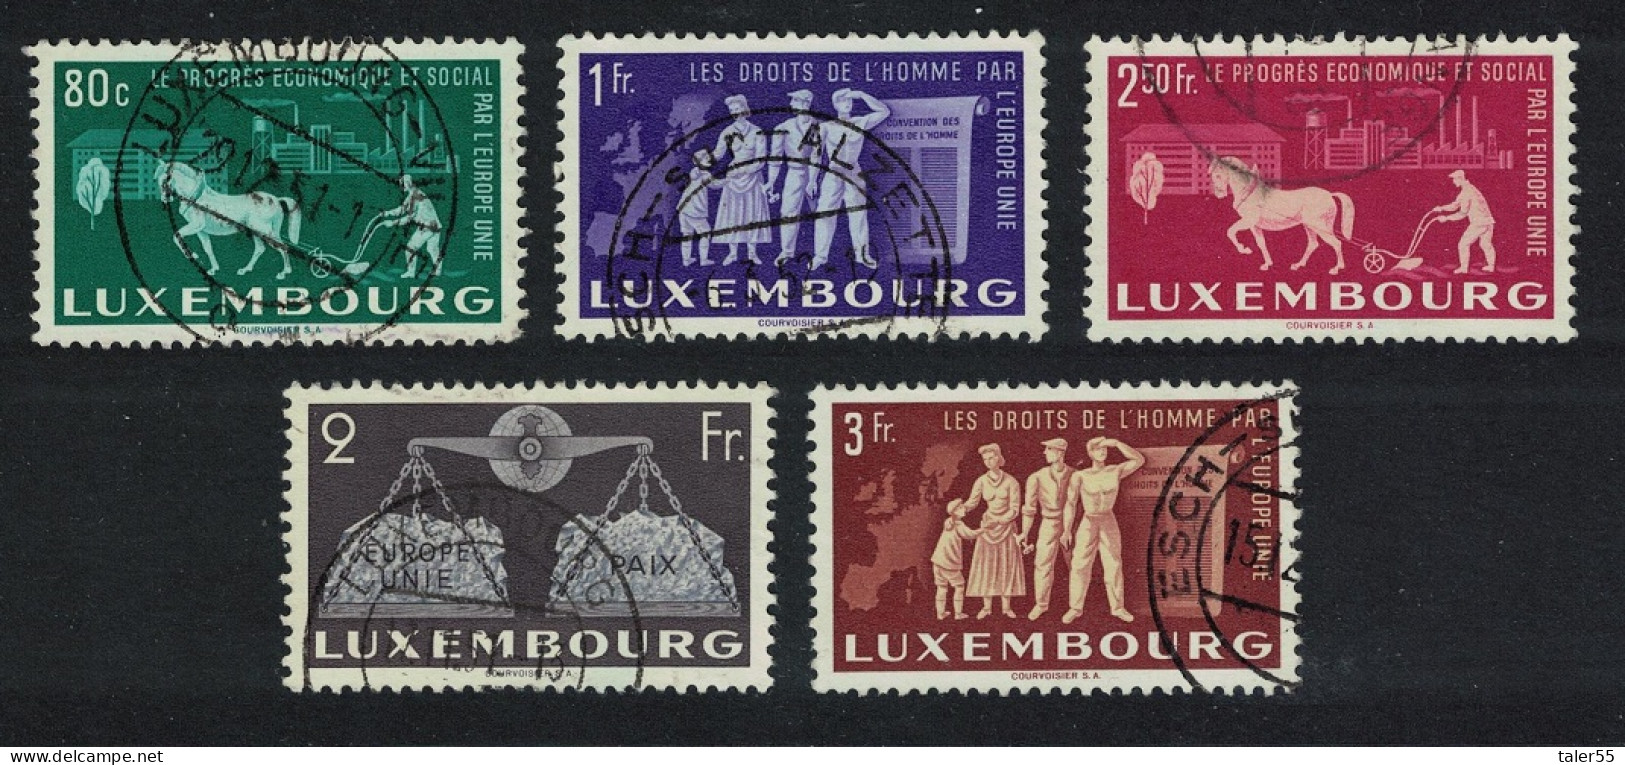 Luxembourg To Promote United Europe 5v 1951 Canc SG#543-547 MI#478-482 - Gebruikt